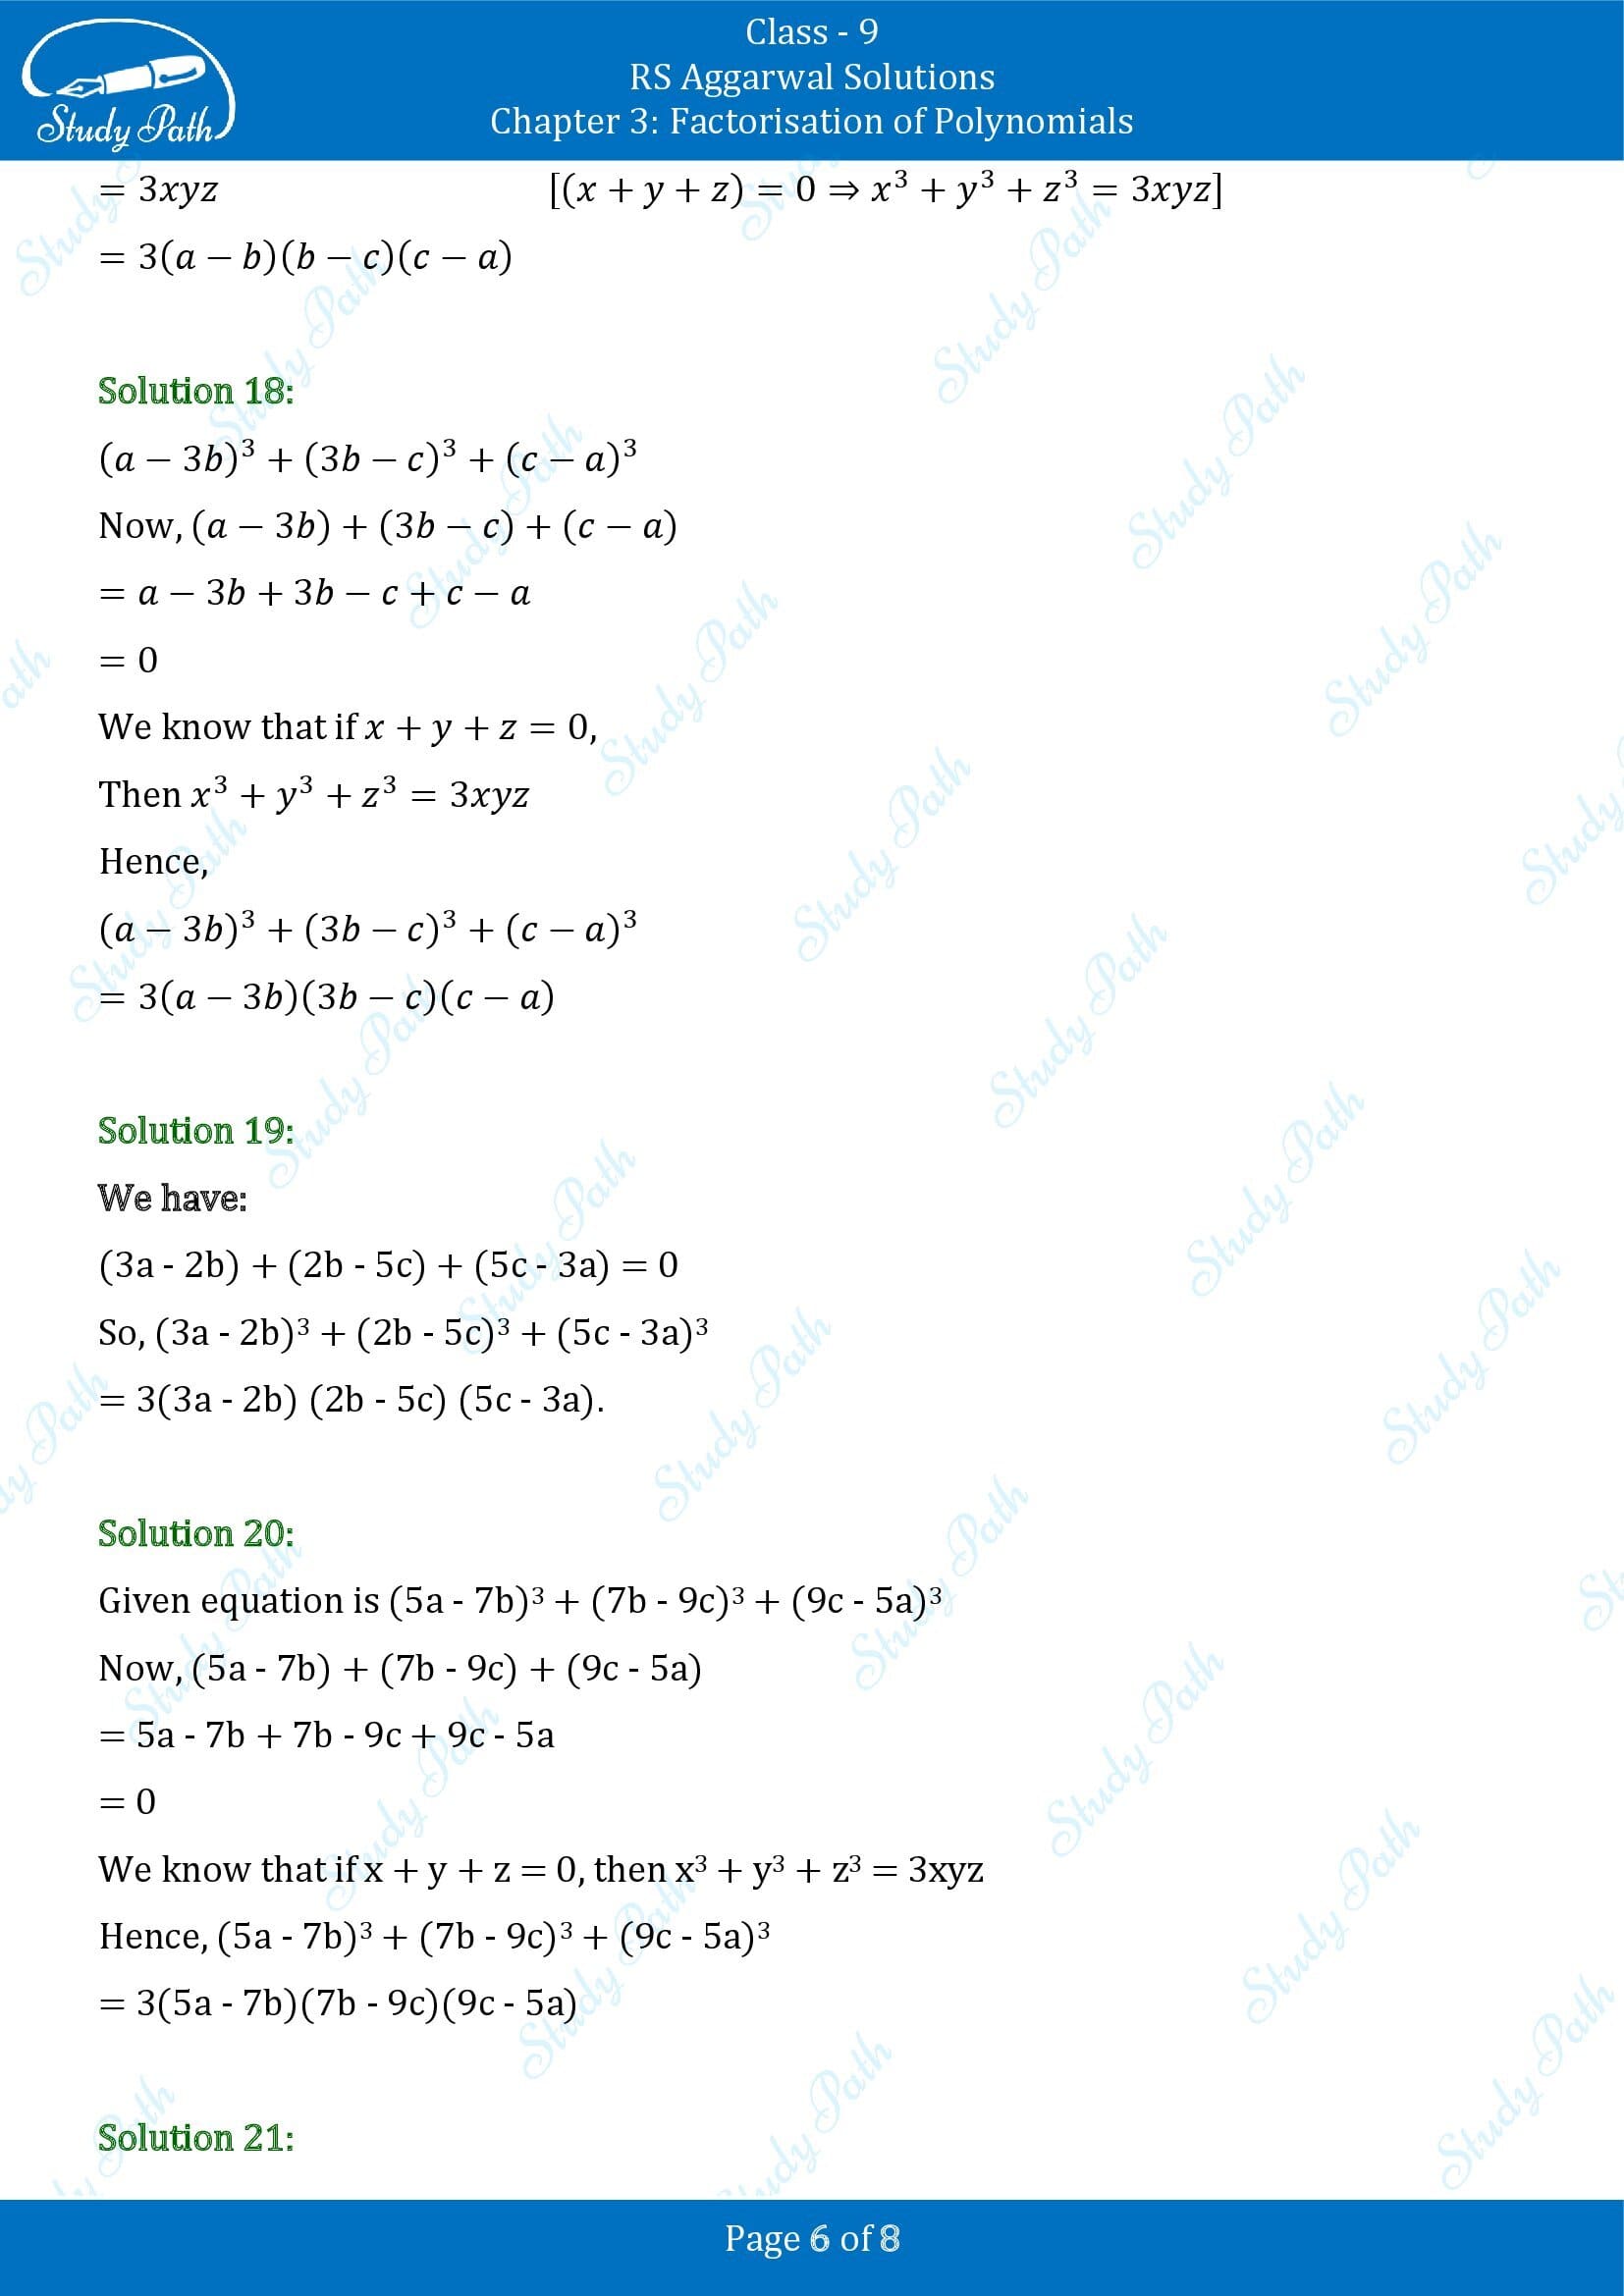 RS Aggarwal Solutions Class 9 Chapter 3 Factorisation of Polynomials Exercise 3G 0006